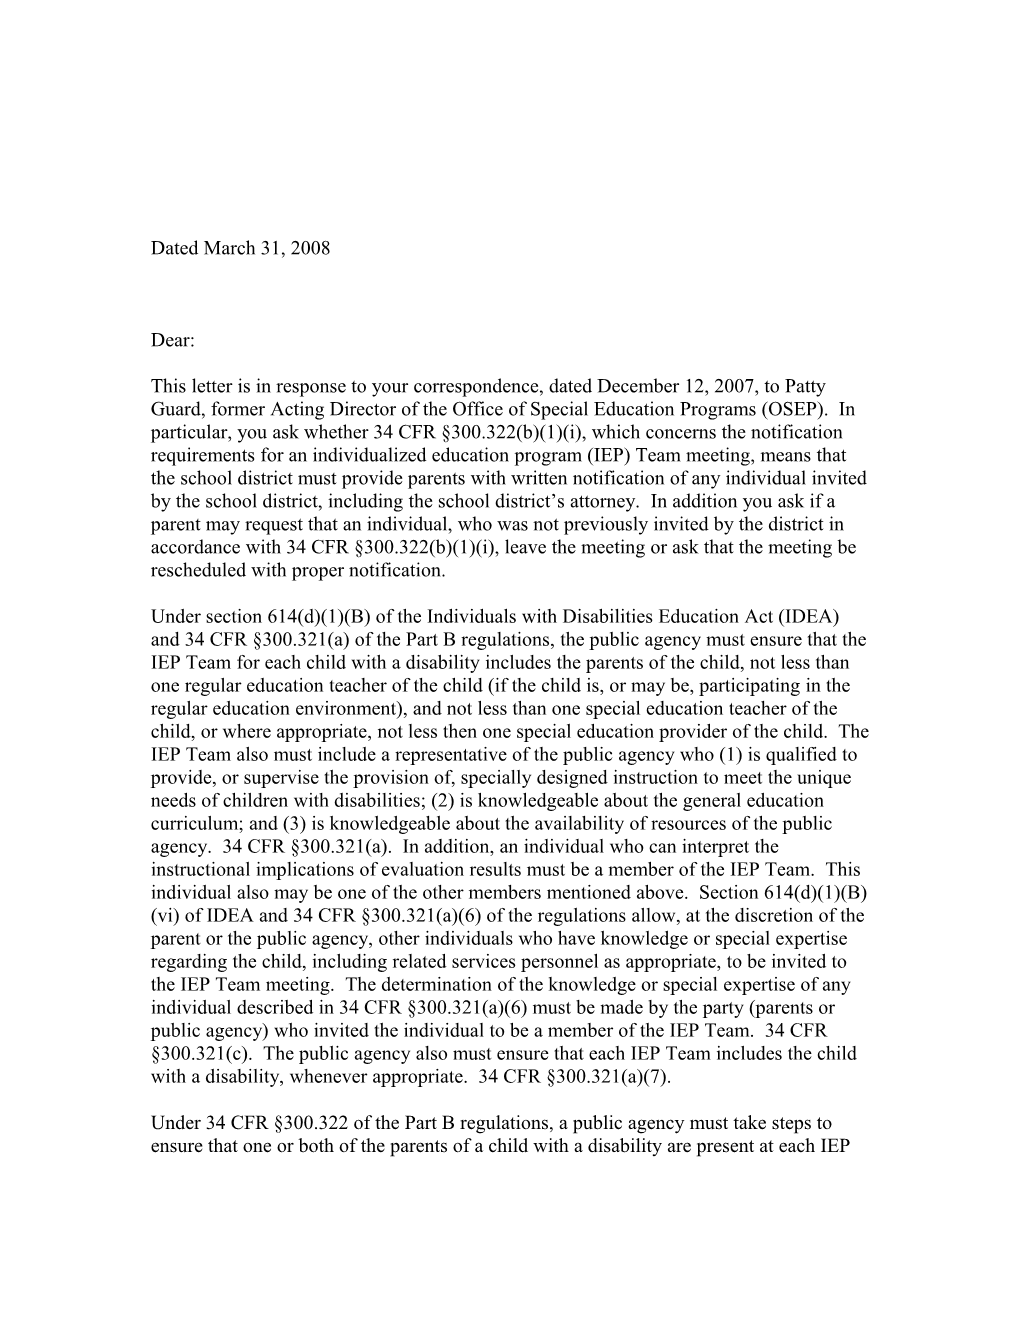 Redacted Letter Dated 3-31-08 Re: Individualized Education Program (MS Word)